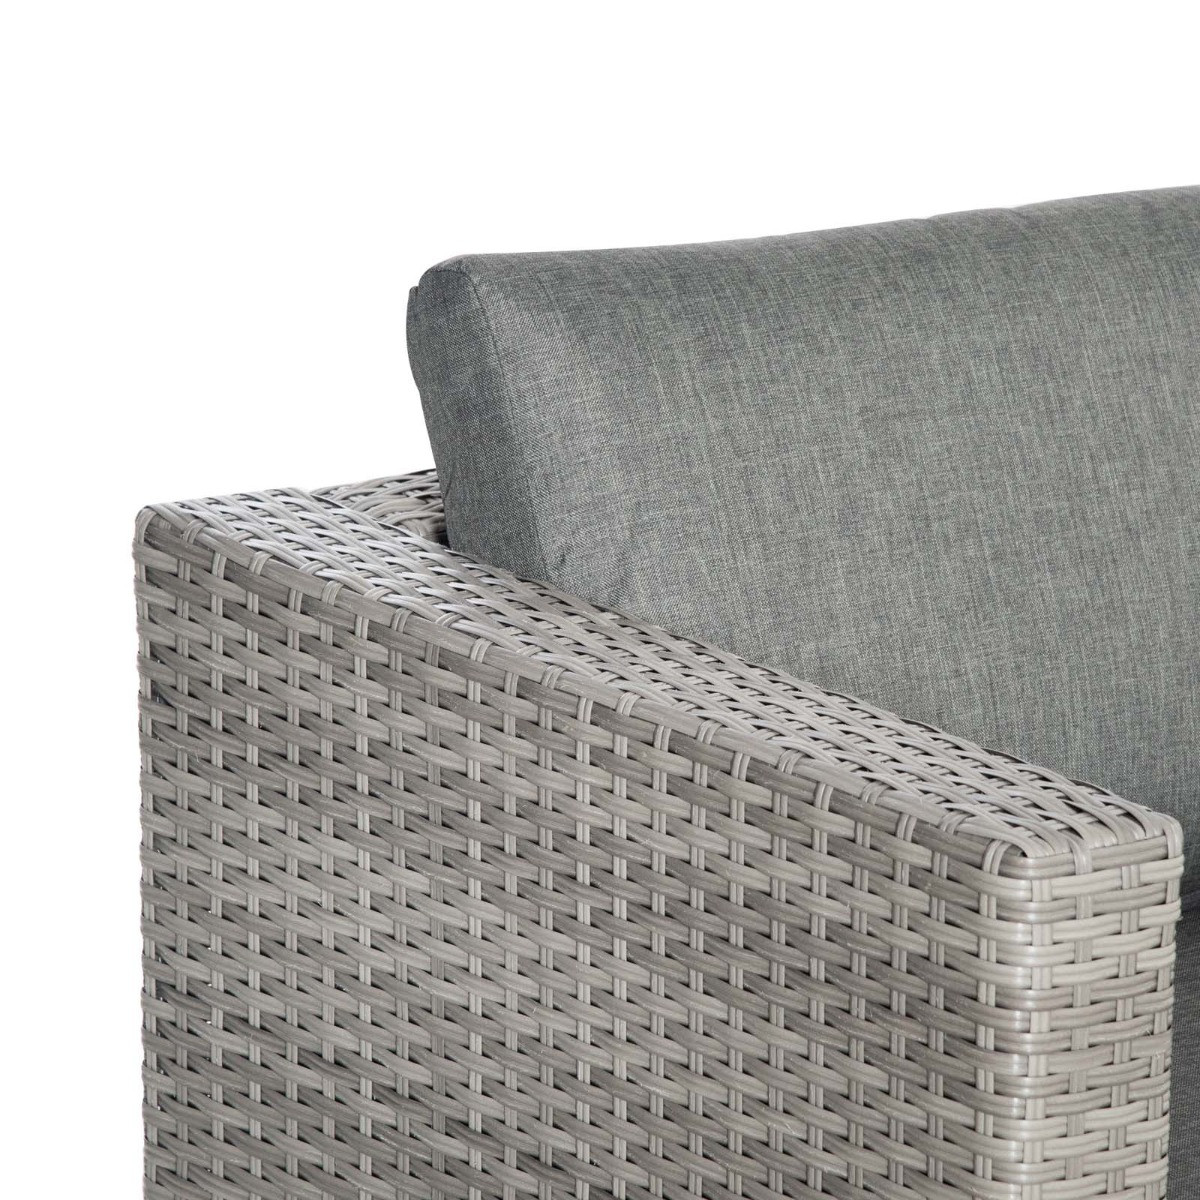 Outsunny Rattan Sofa Set With Coffee Table, 3 Piece - Grey>